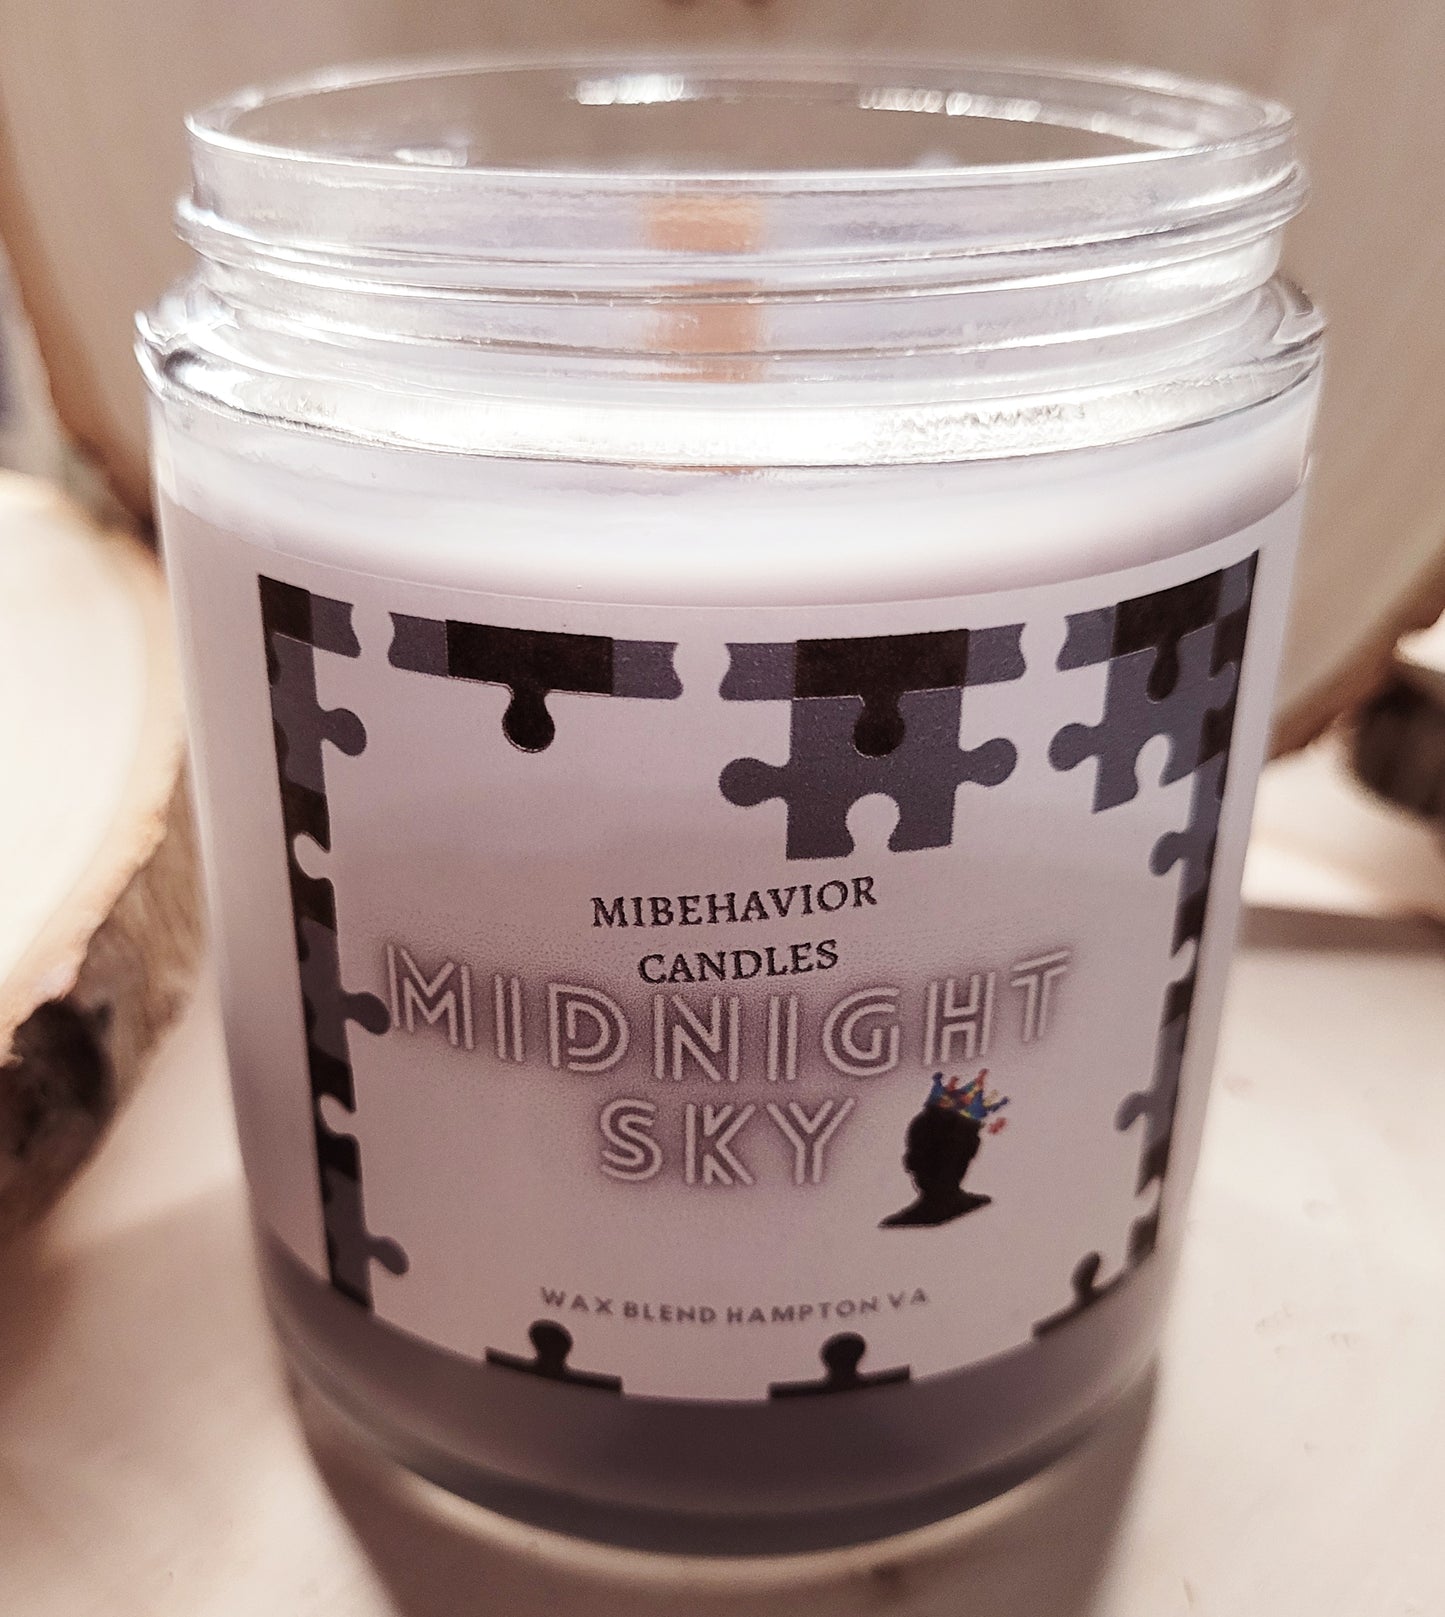 Midnight Sky Candles